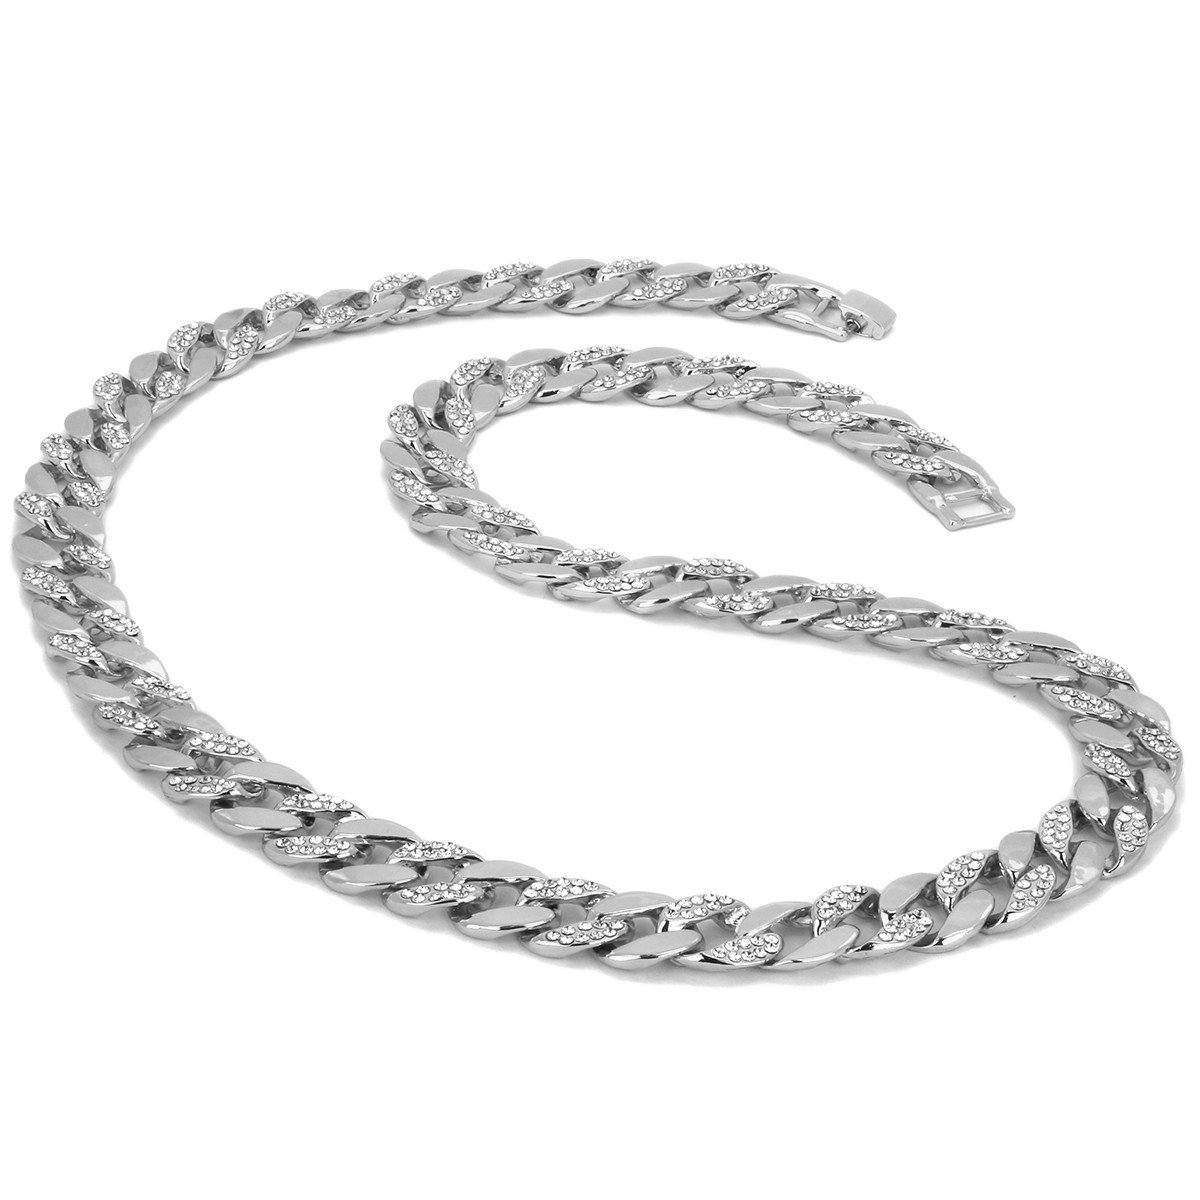 Silver Plated Cuban Half Cz Chain Necklace 15mm 30" Inches